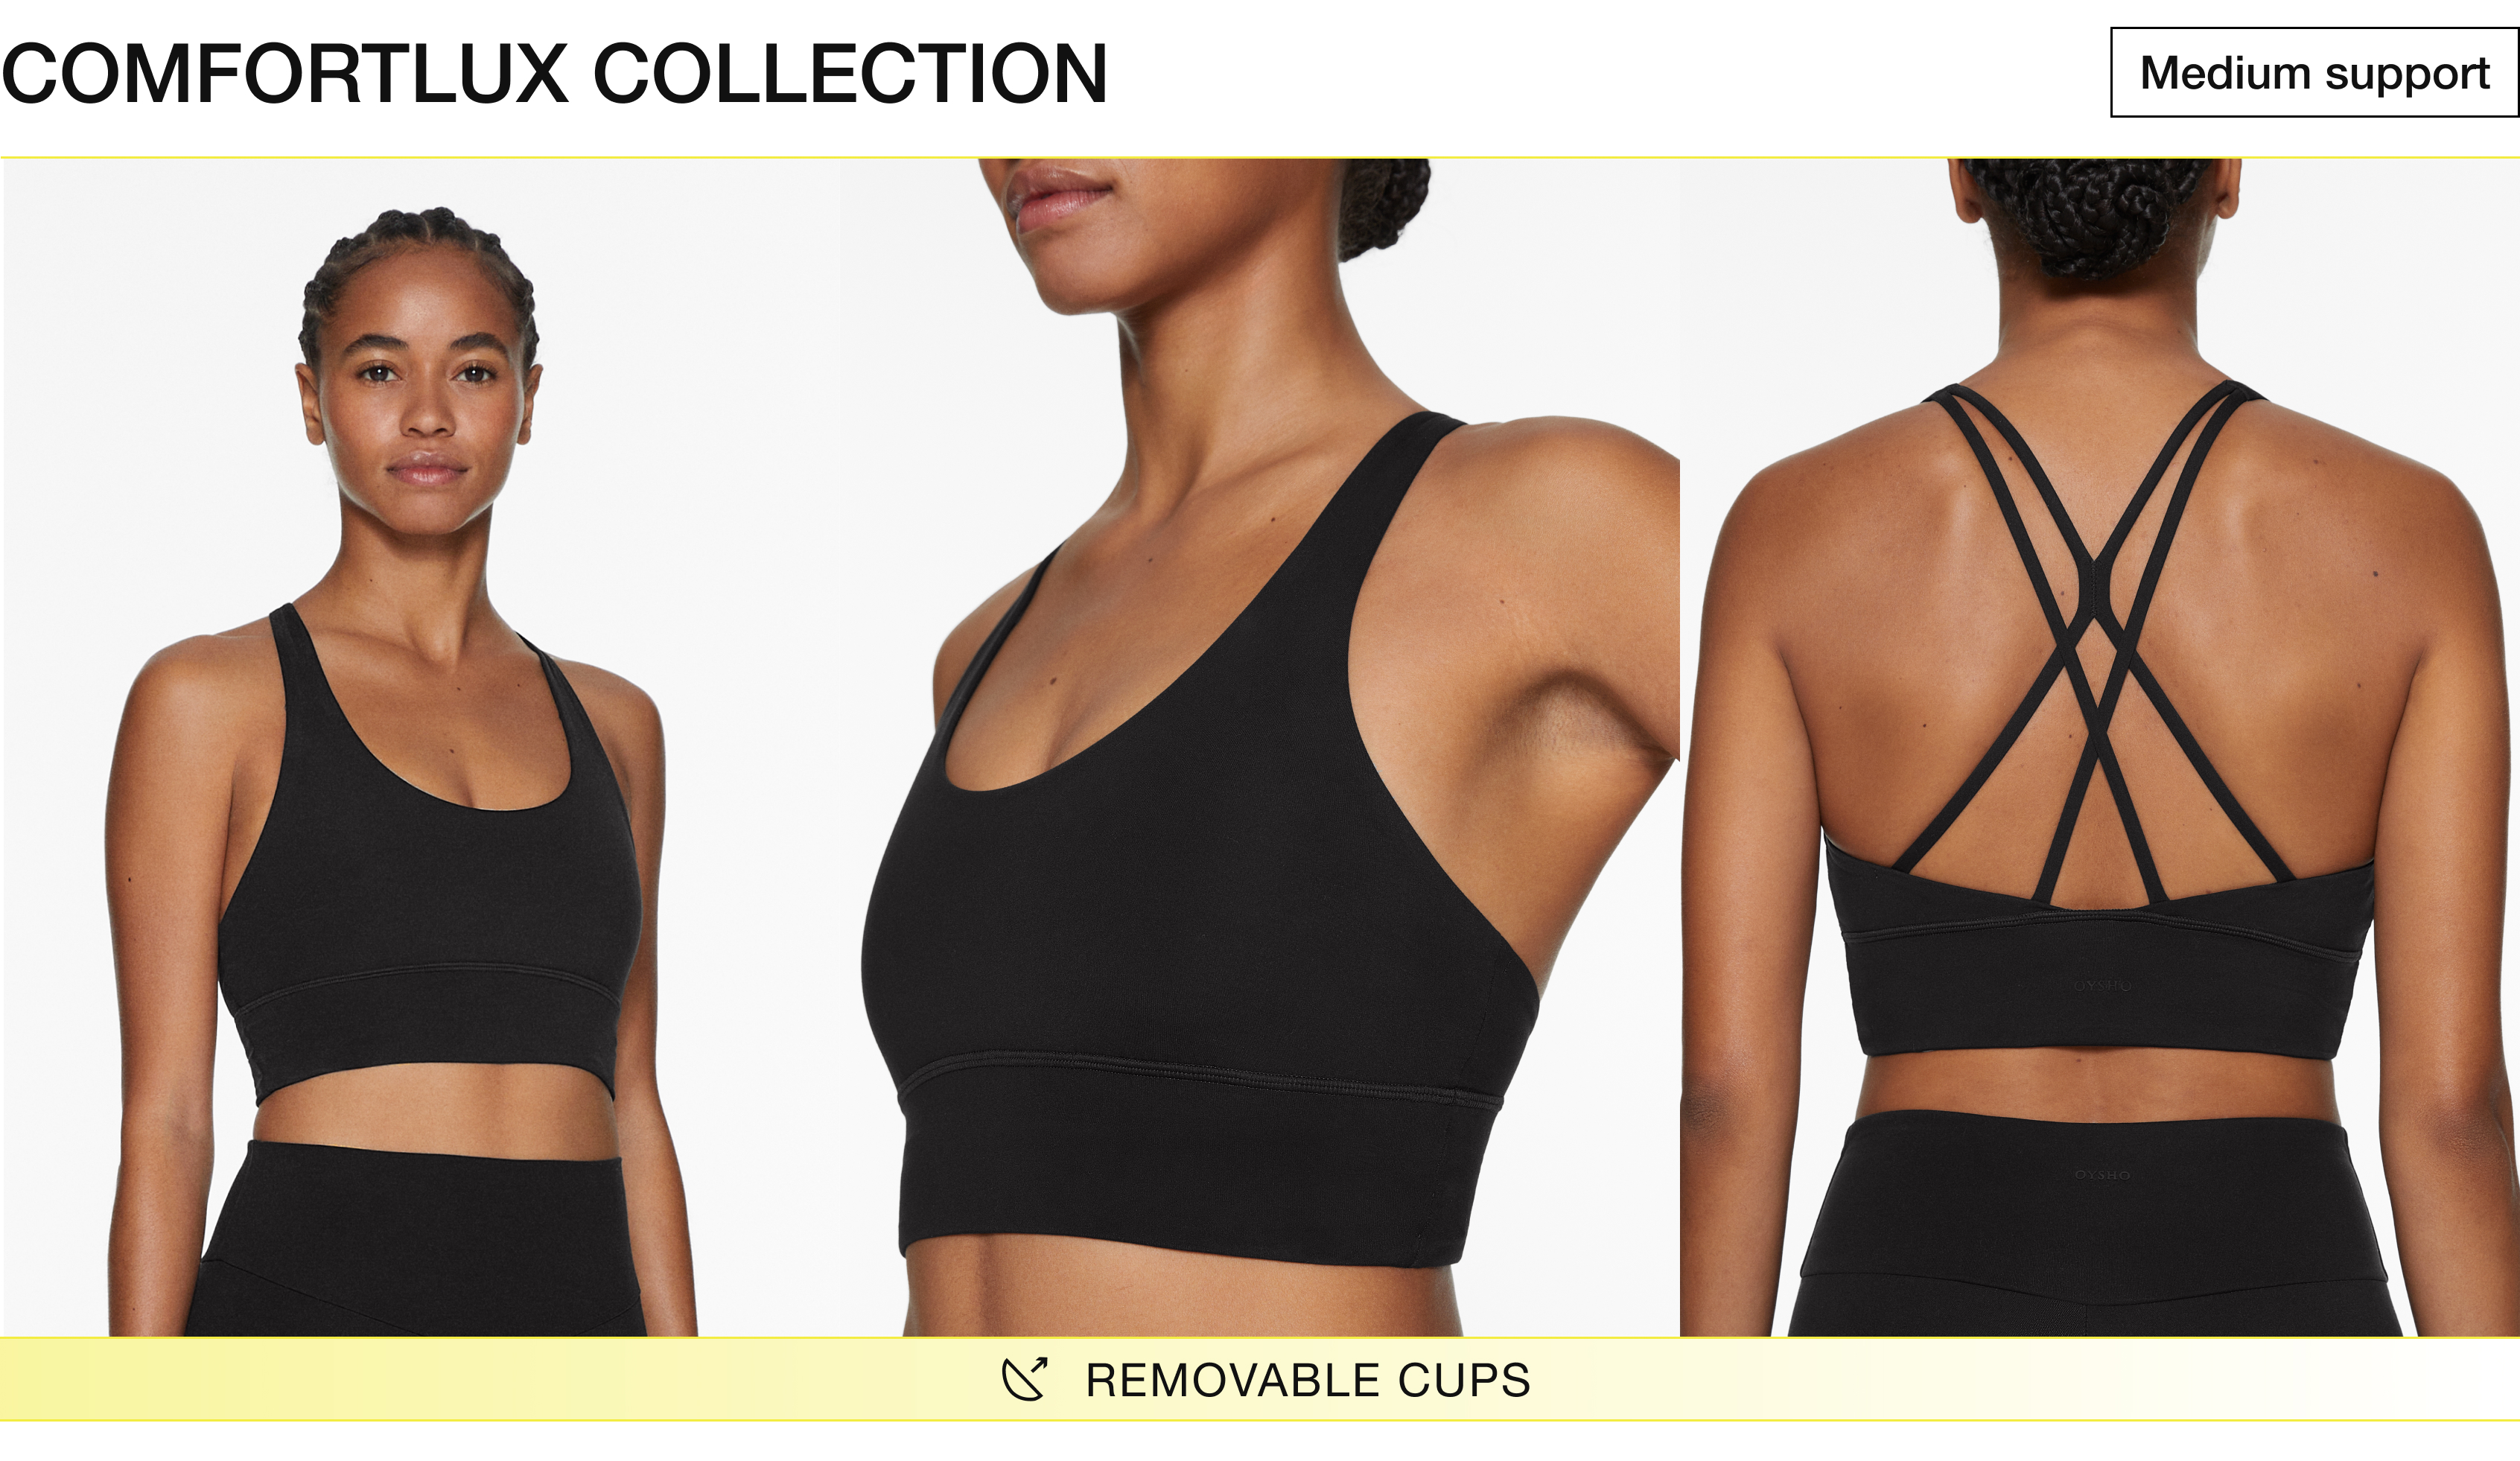 Licious-essentials - ANKO shock absorber sports bra, Available in size 42C  🔥🔥🔥🔥🔥 This sports bra is the truth🙌🏻, it gives full coverage and it  holds the boobs and prevents it from jumping